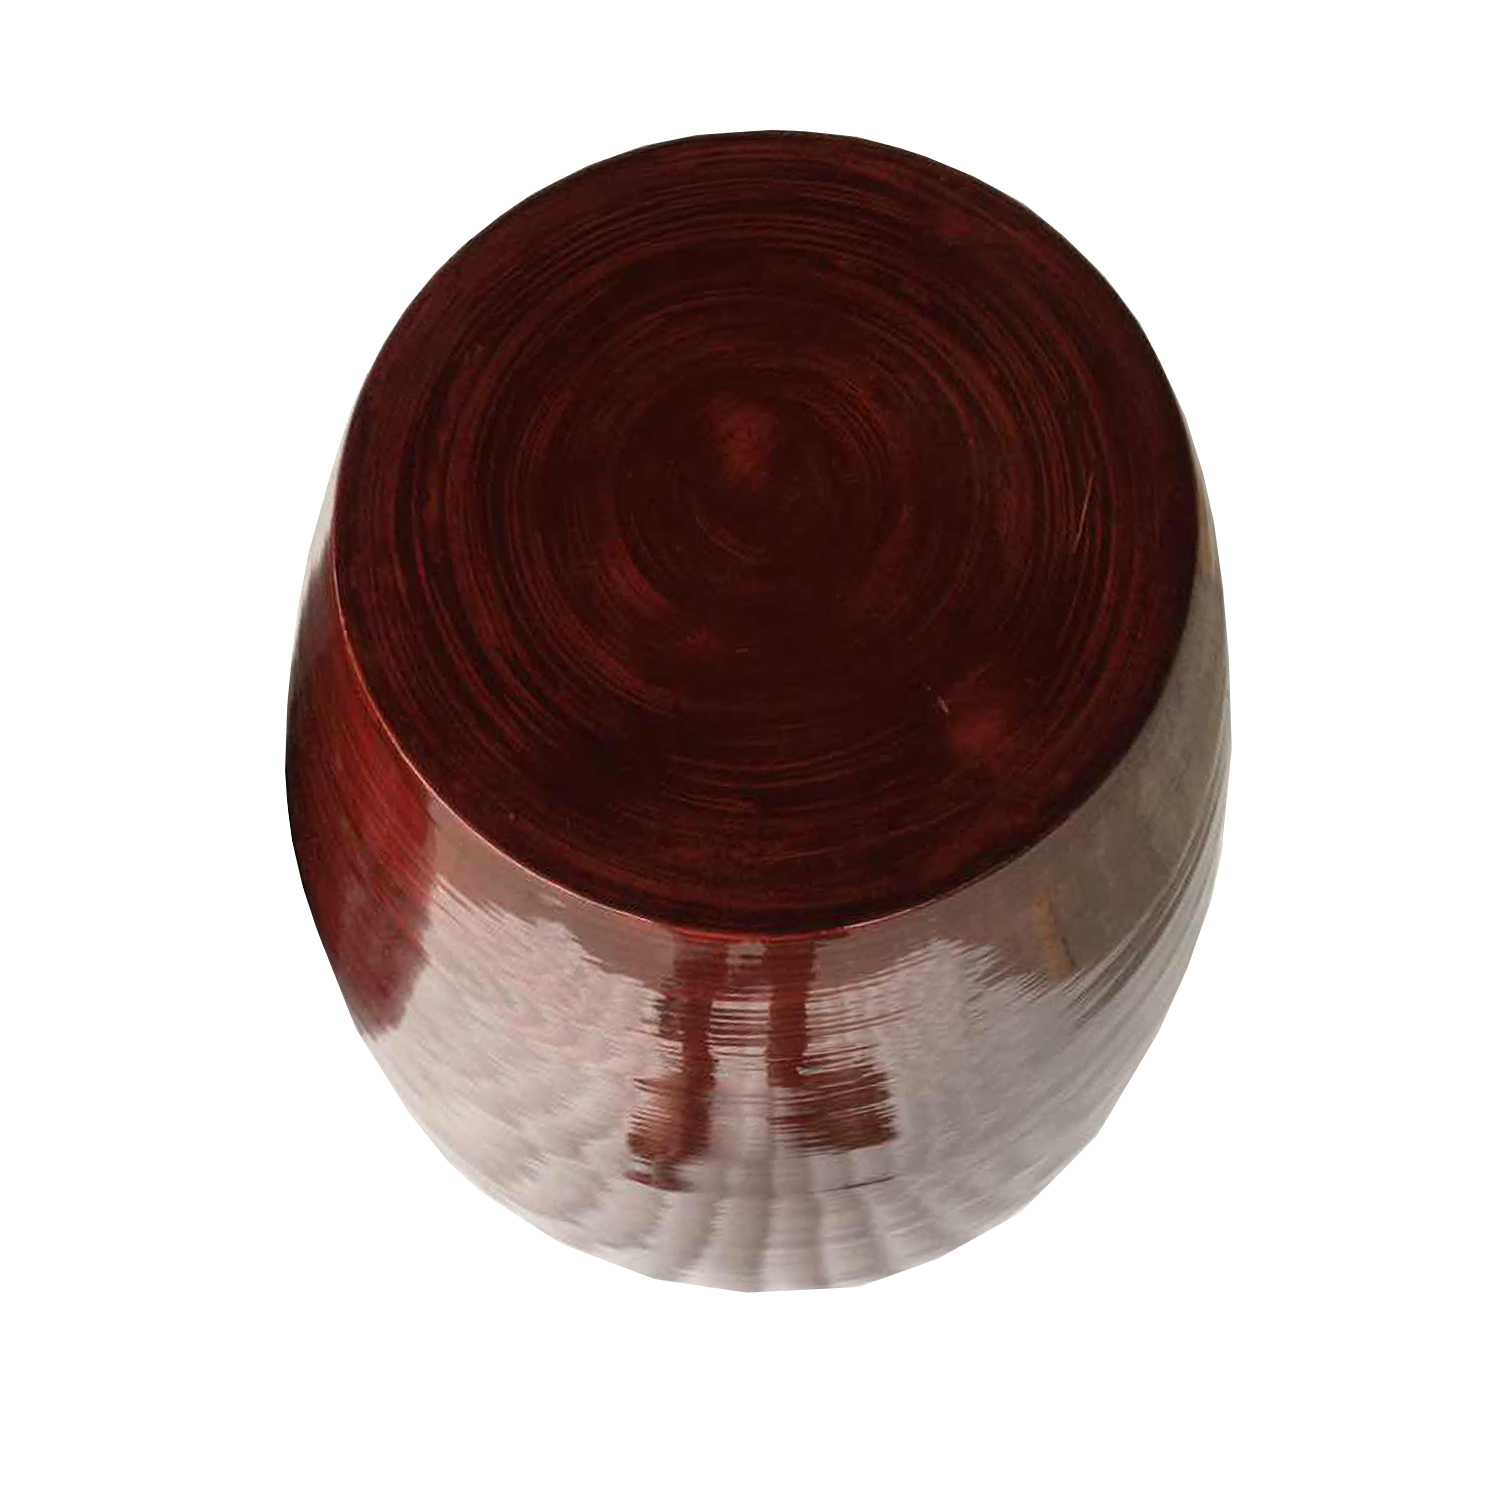 29.5" Red Lacquer Spun Bamboo Floor Vase